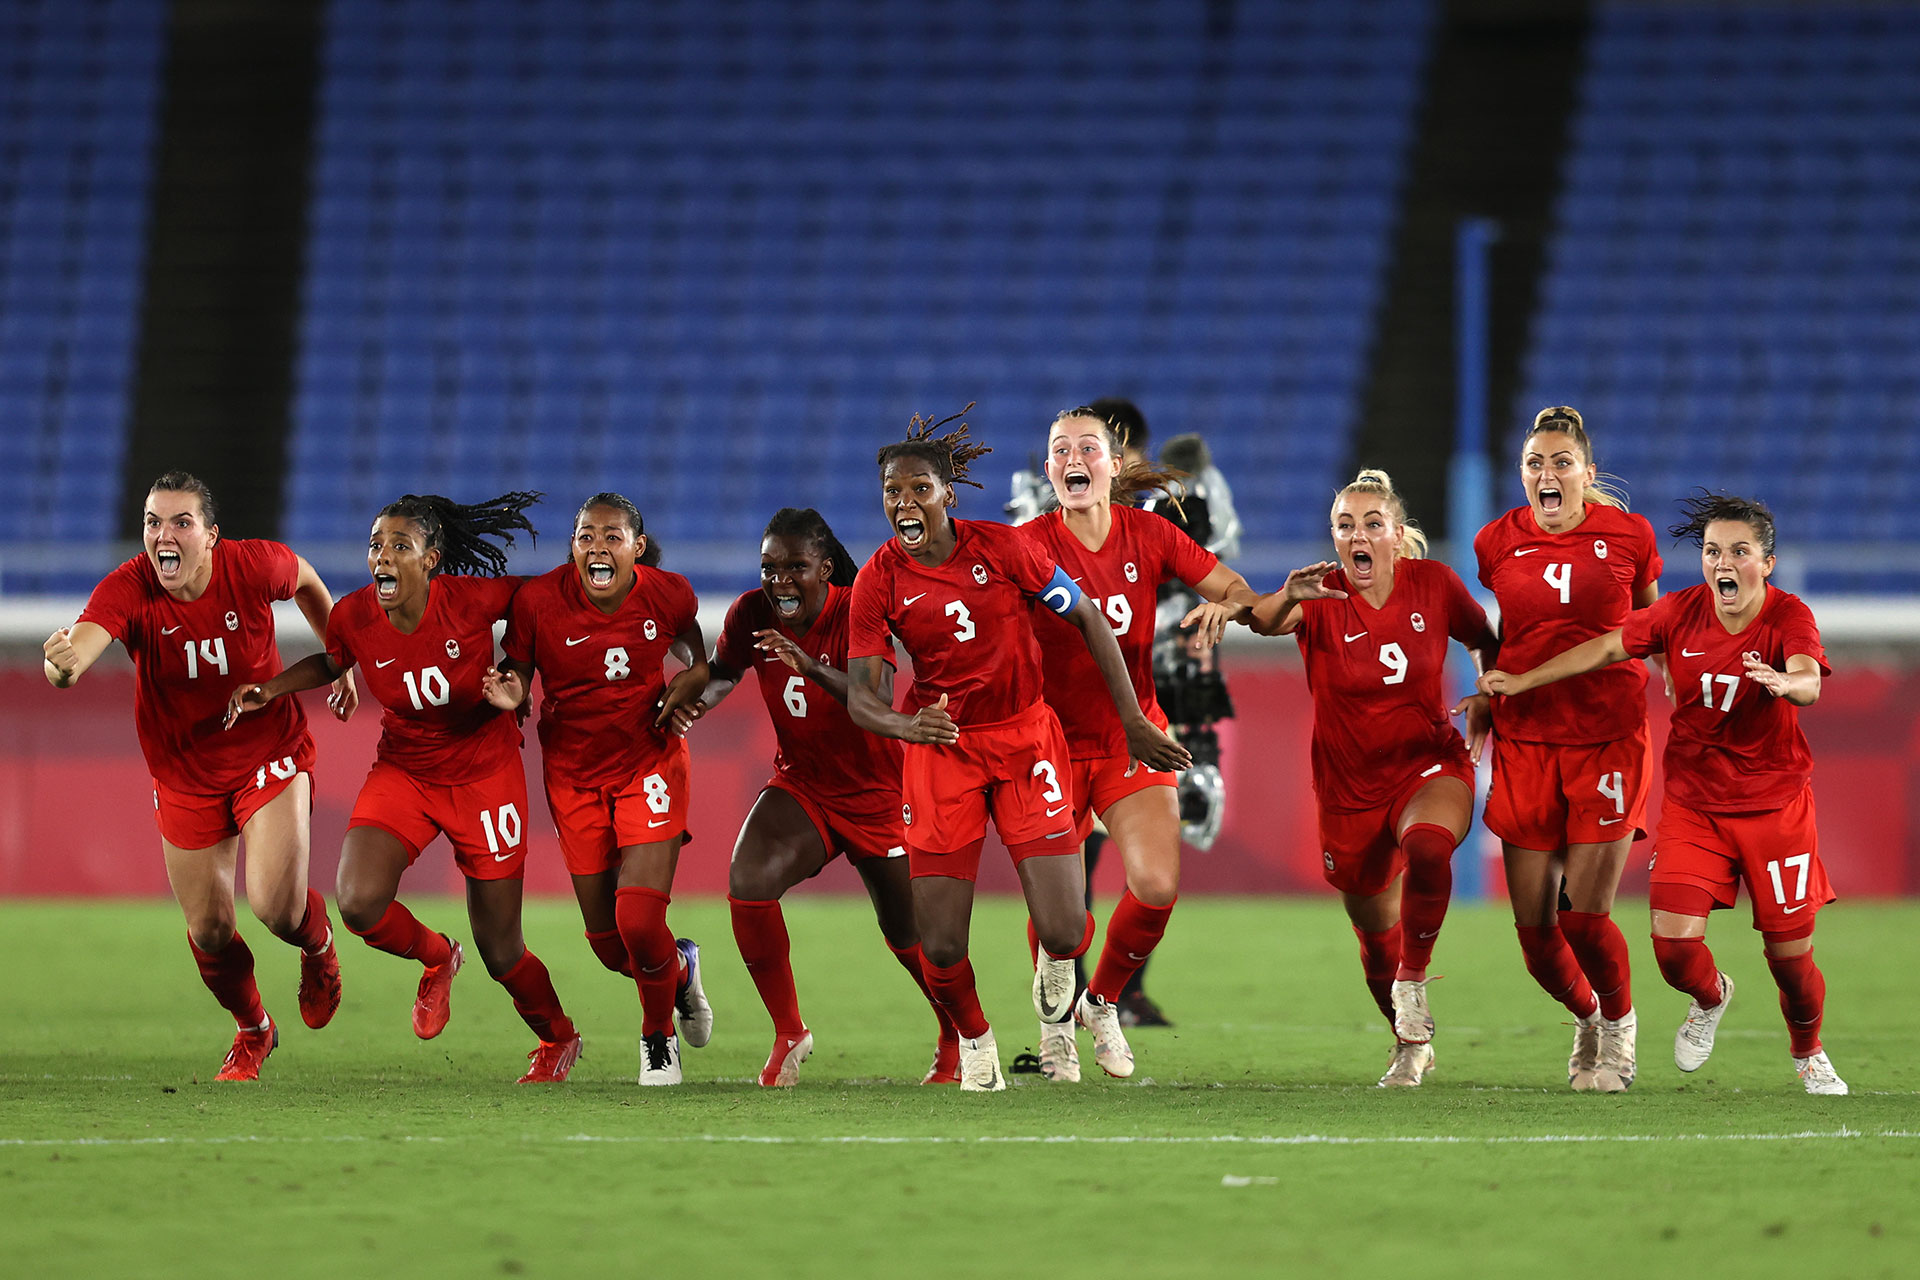 Players of Team Canada celebrate following their team&#x27;s victory in the penalty shoot out in the Women&#x27;s Gold Medal Match between Canada and Sweden on day fourteen of the Tokyo 2020 Olympic Games at International Stadium Yokohama on August 06, 2021 in Yokohama, Kanagawa, Japan.